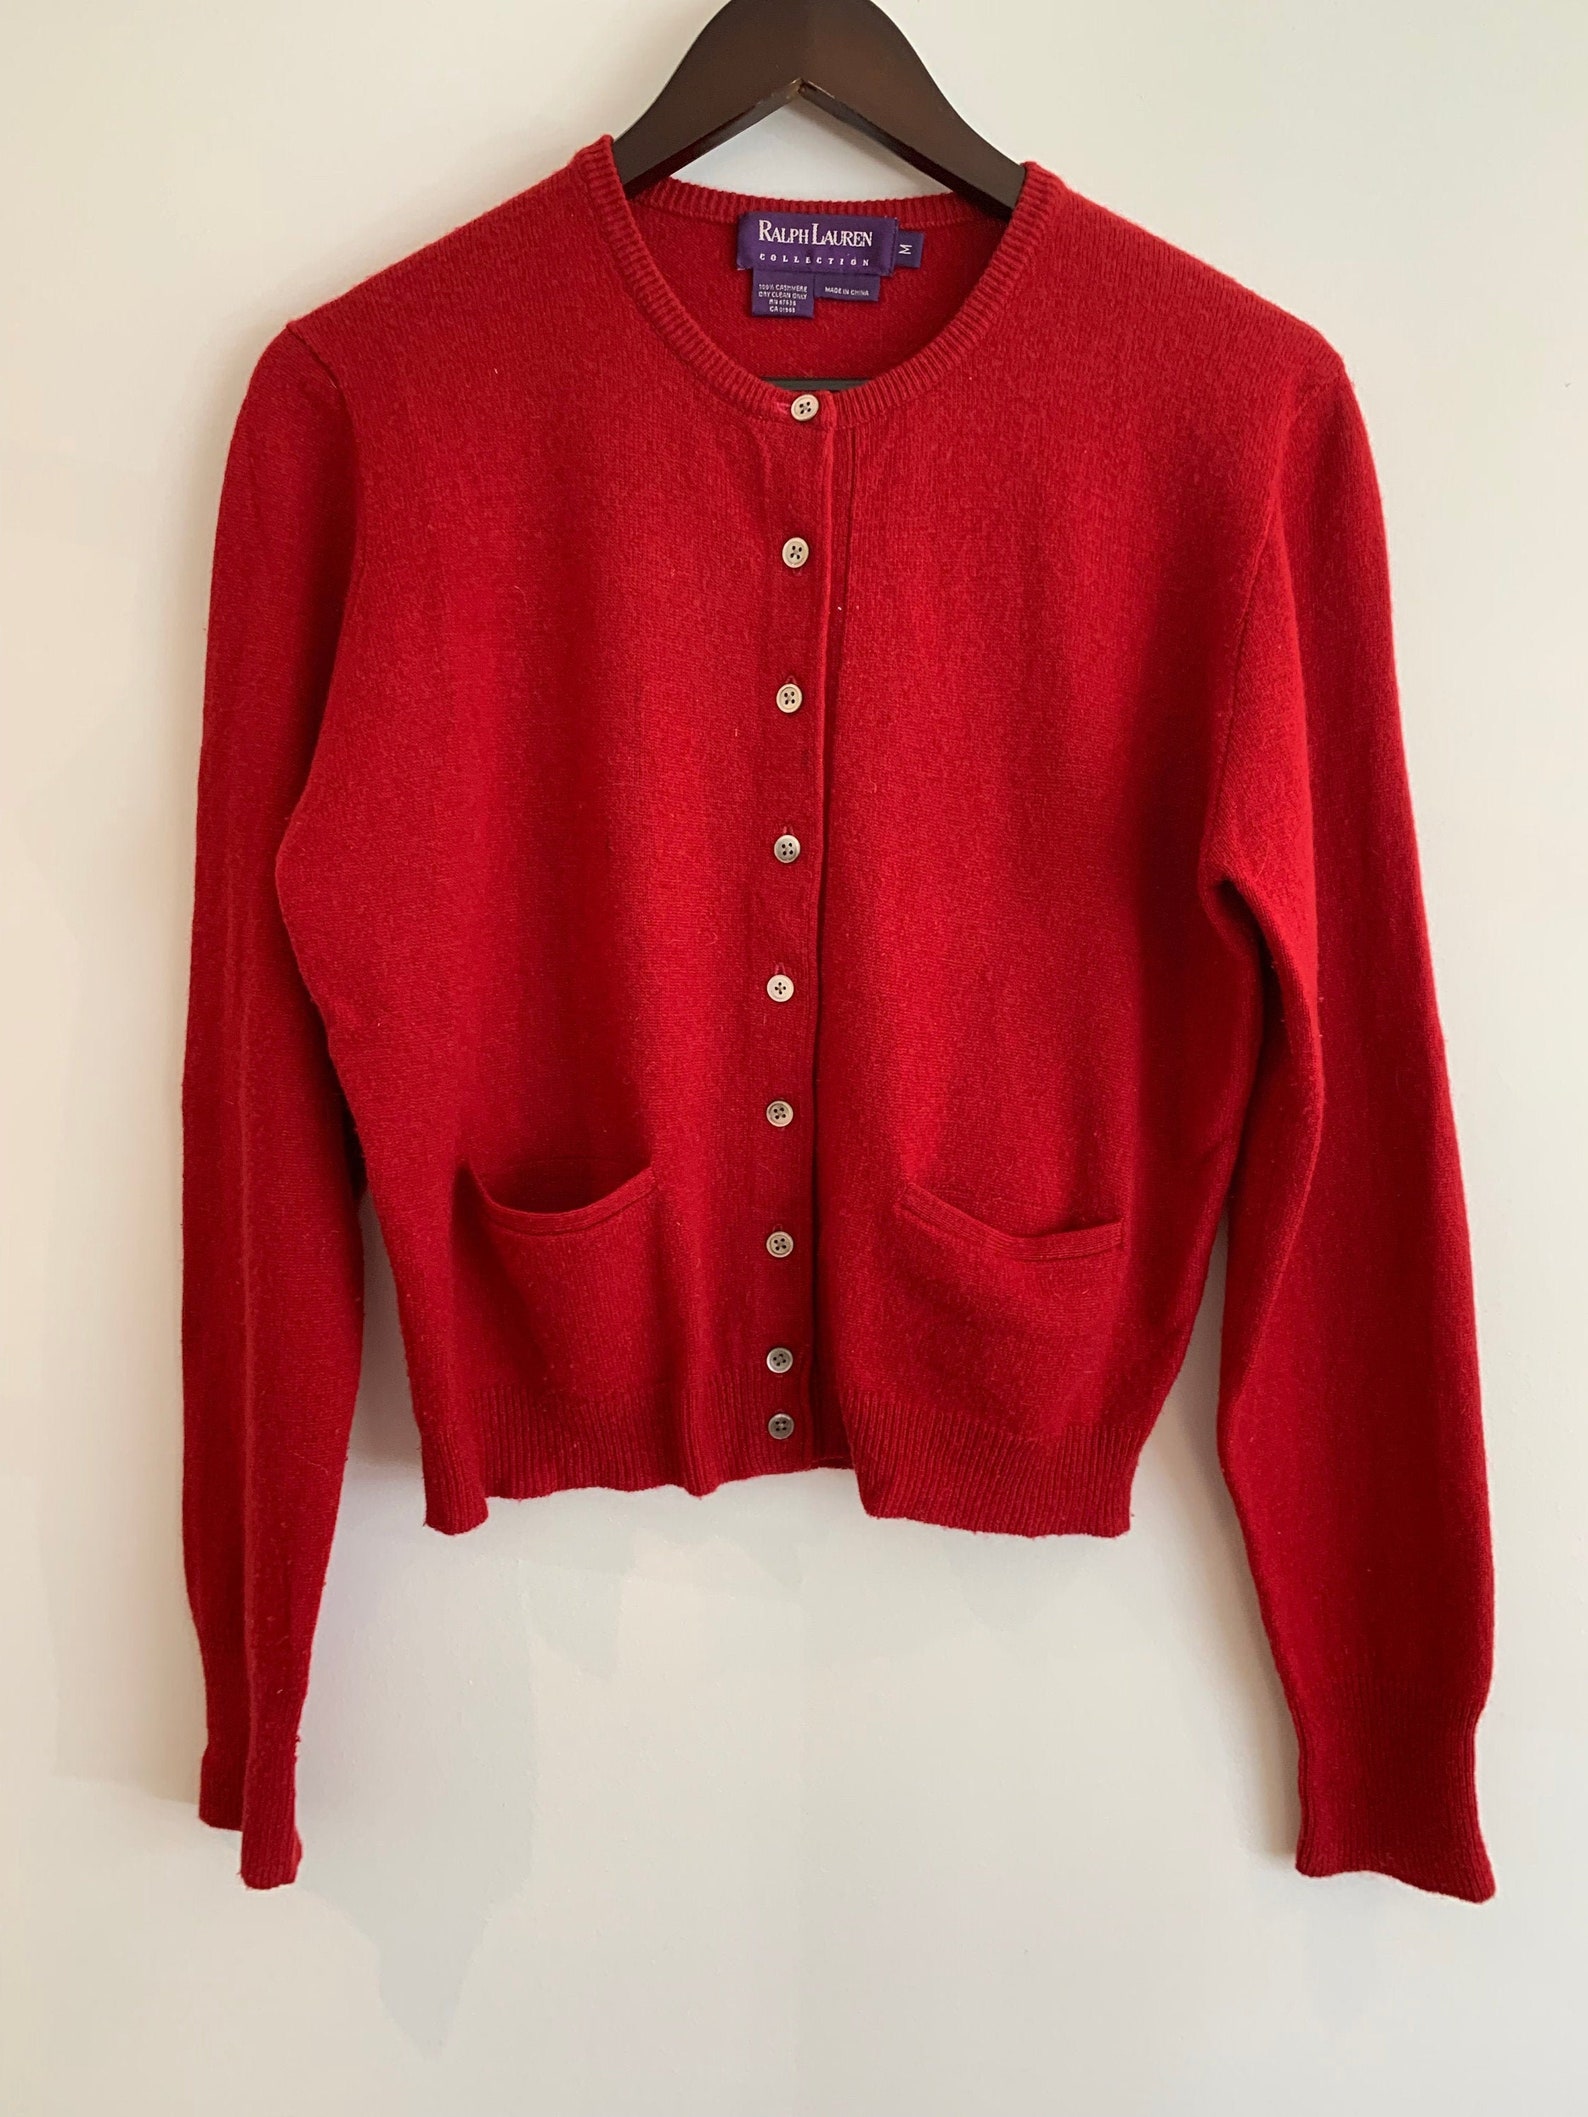 RALPH LAUREN Collection Cashmere Cardigan in Red. Women's | Etsy